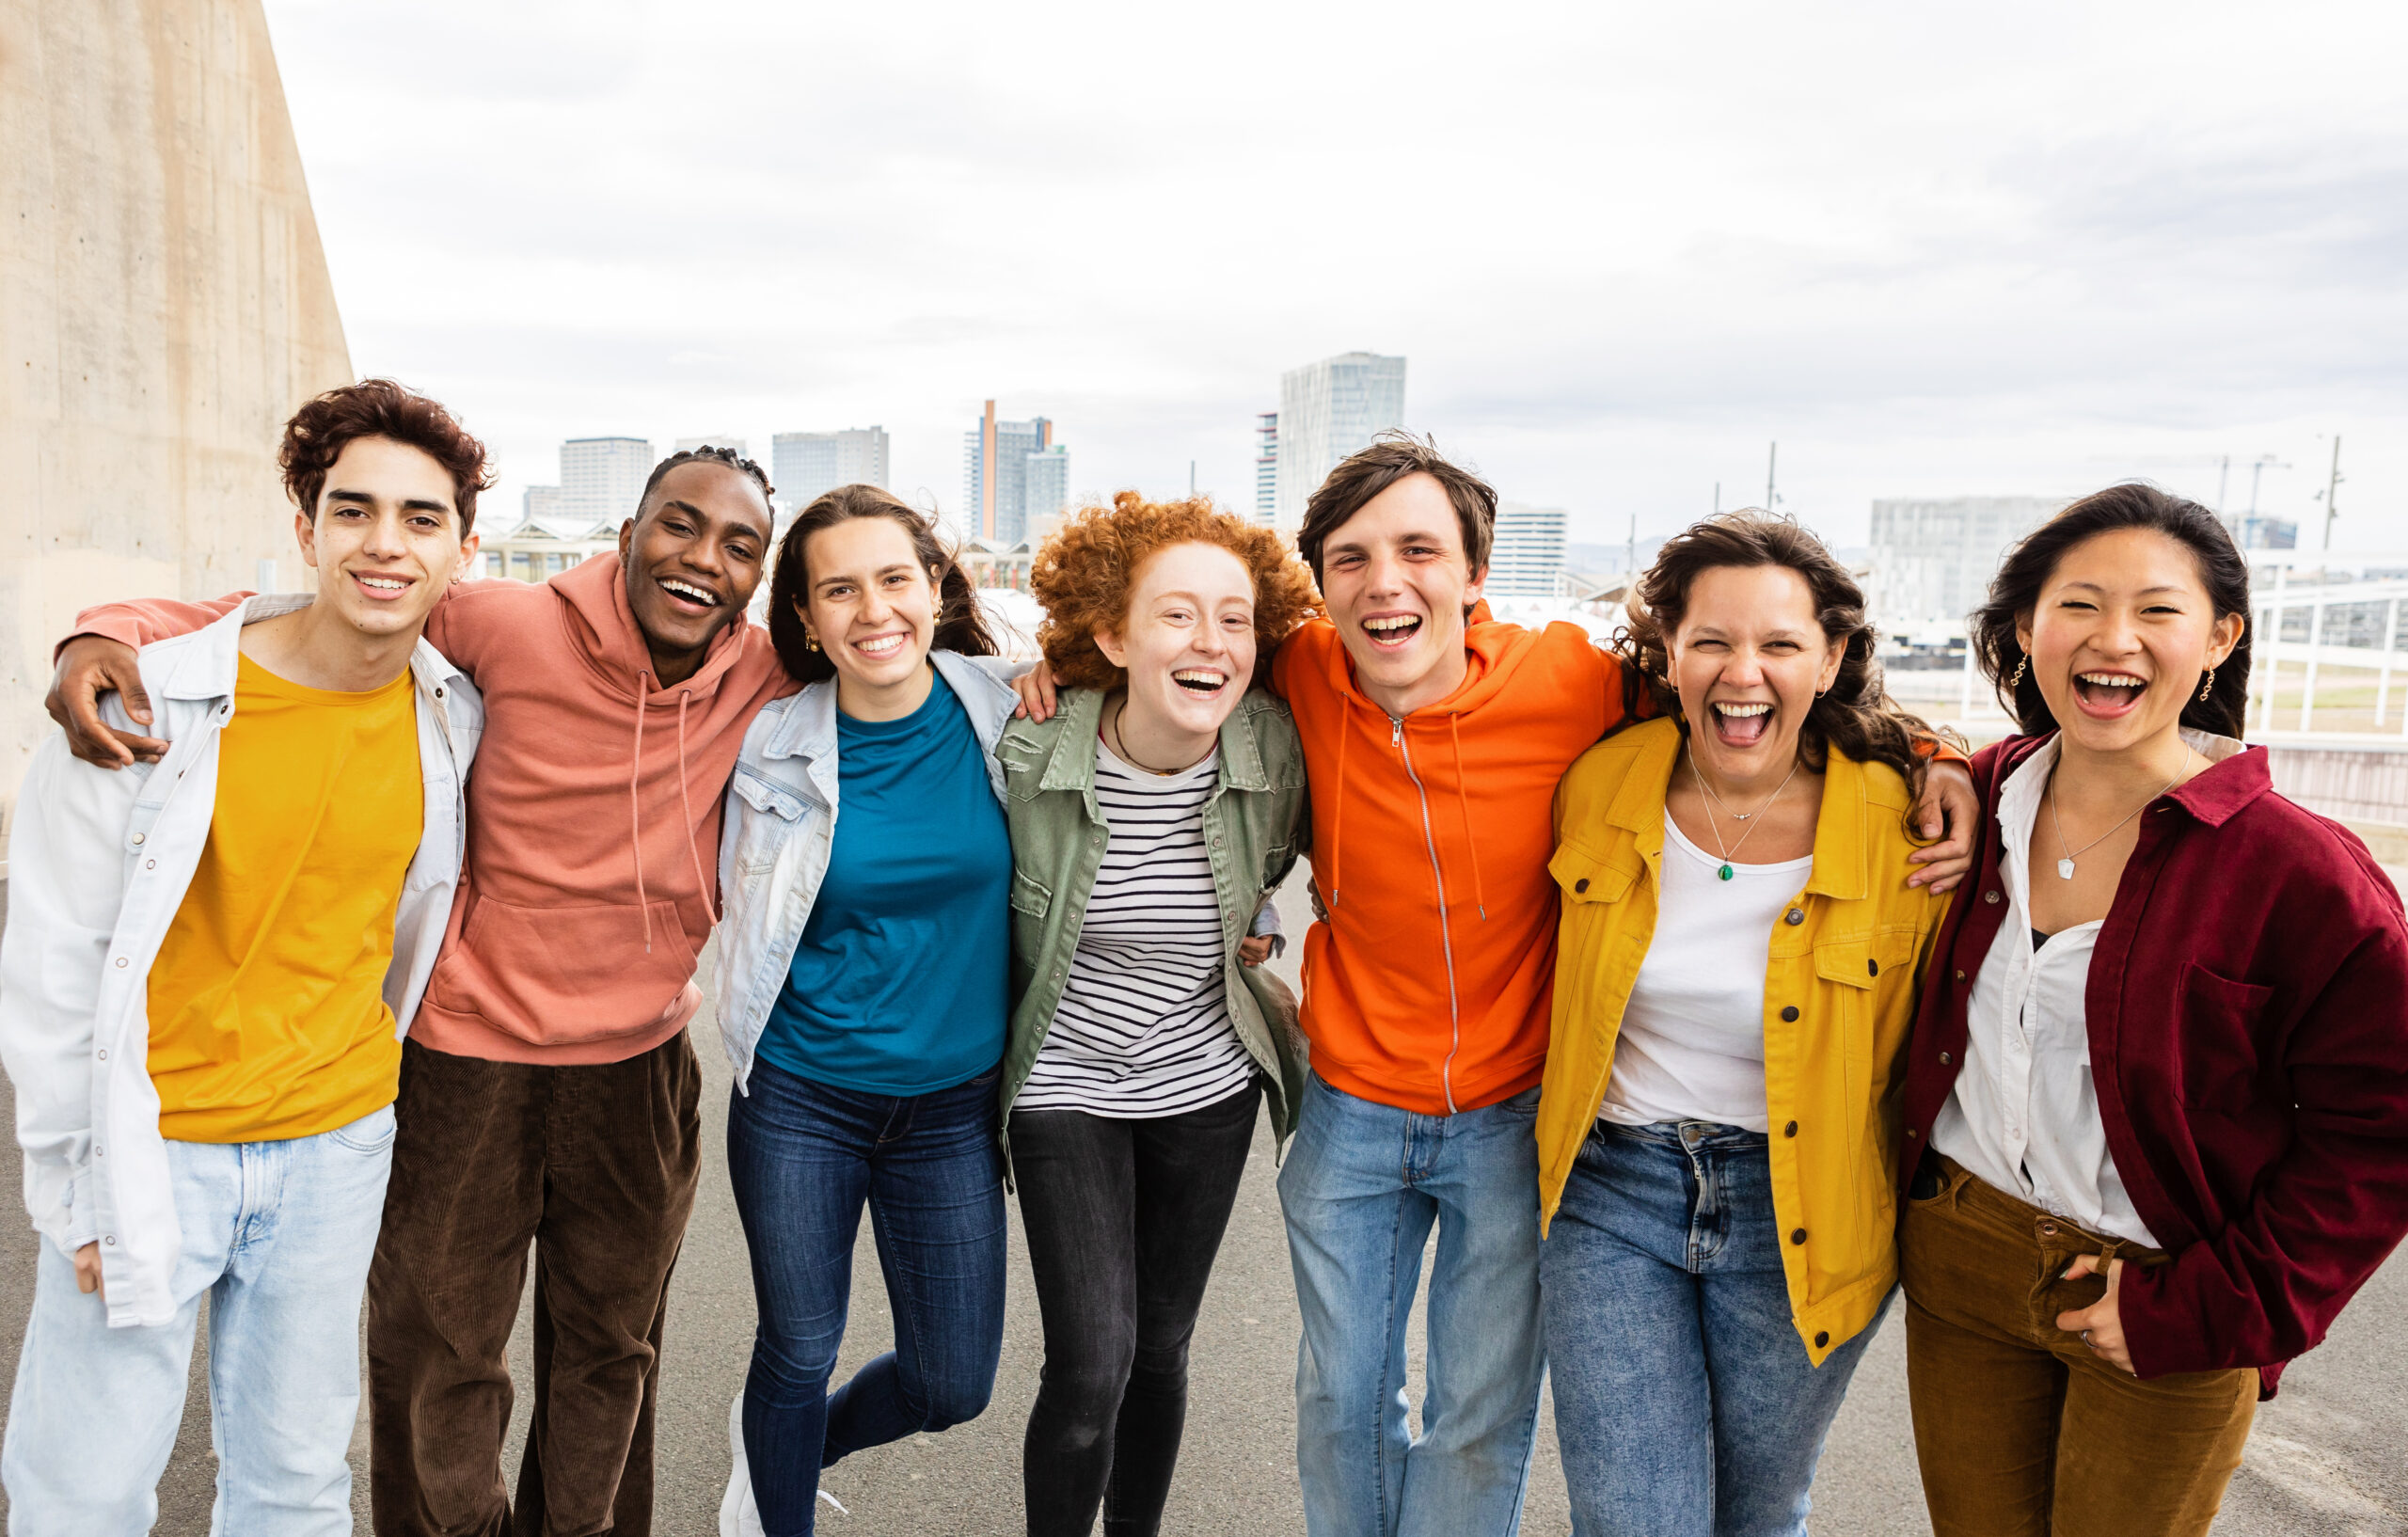 Happy group portrait of student teen friends hugging each other smiling at camera outside. Diverse teenagers having fun outdoors. Youth and millennial people concept